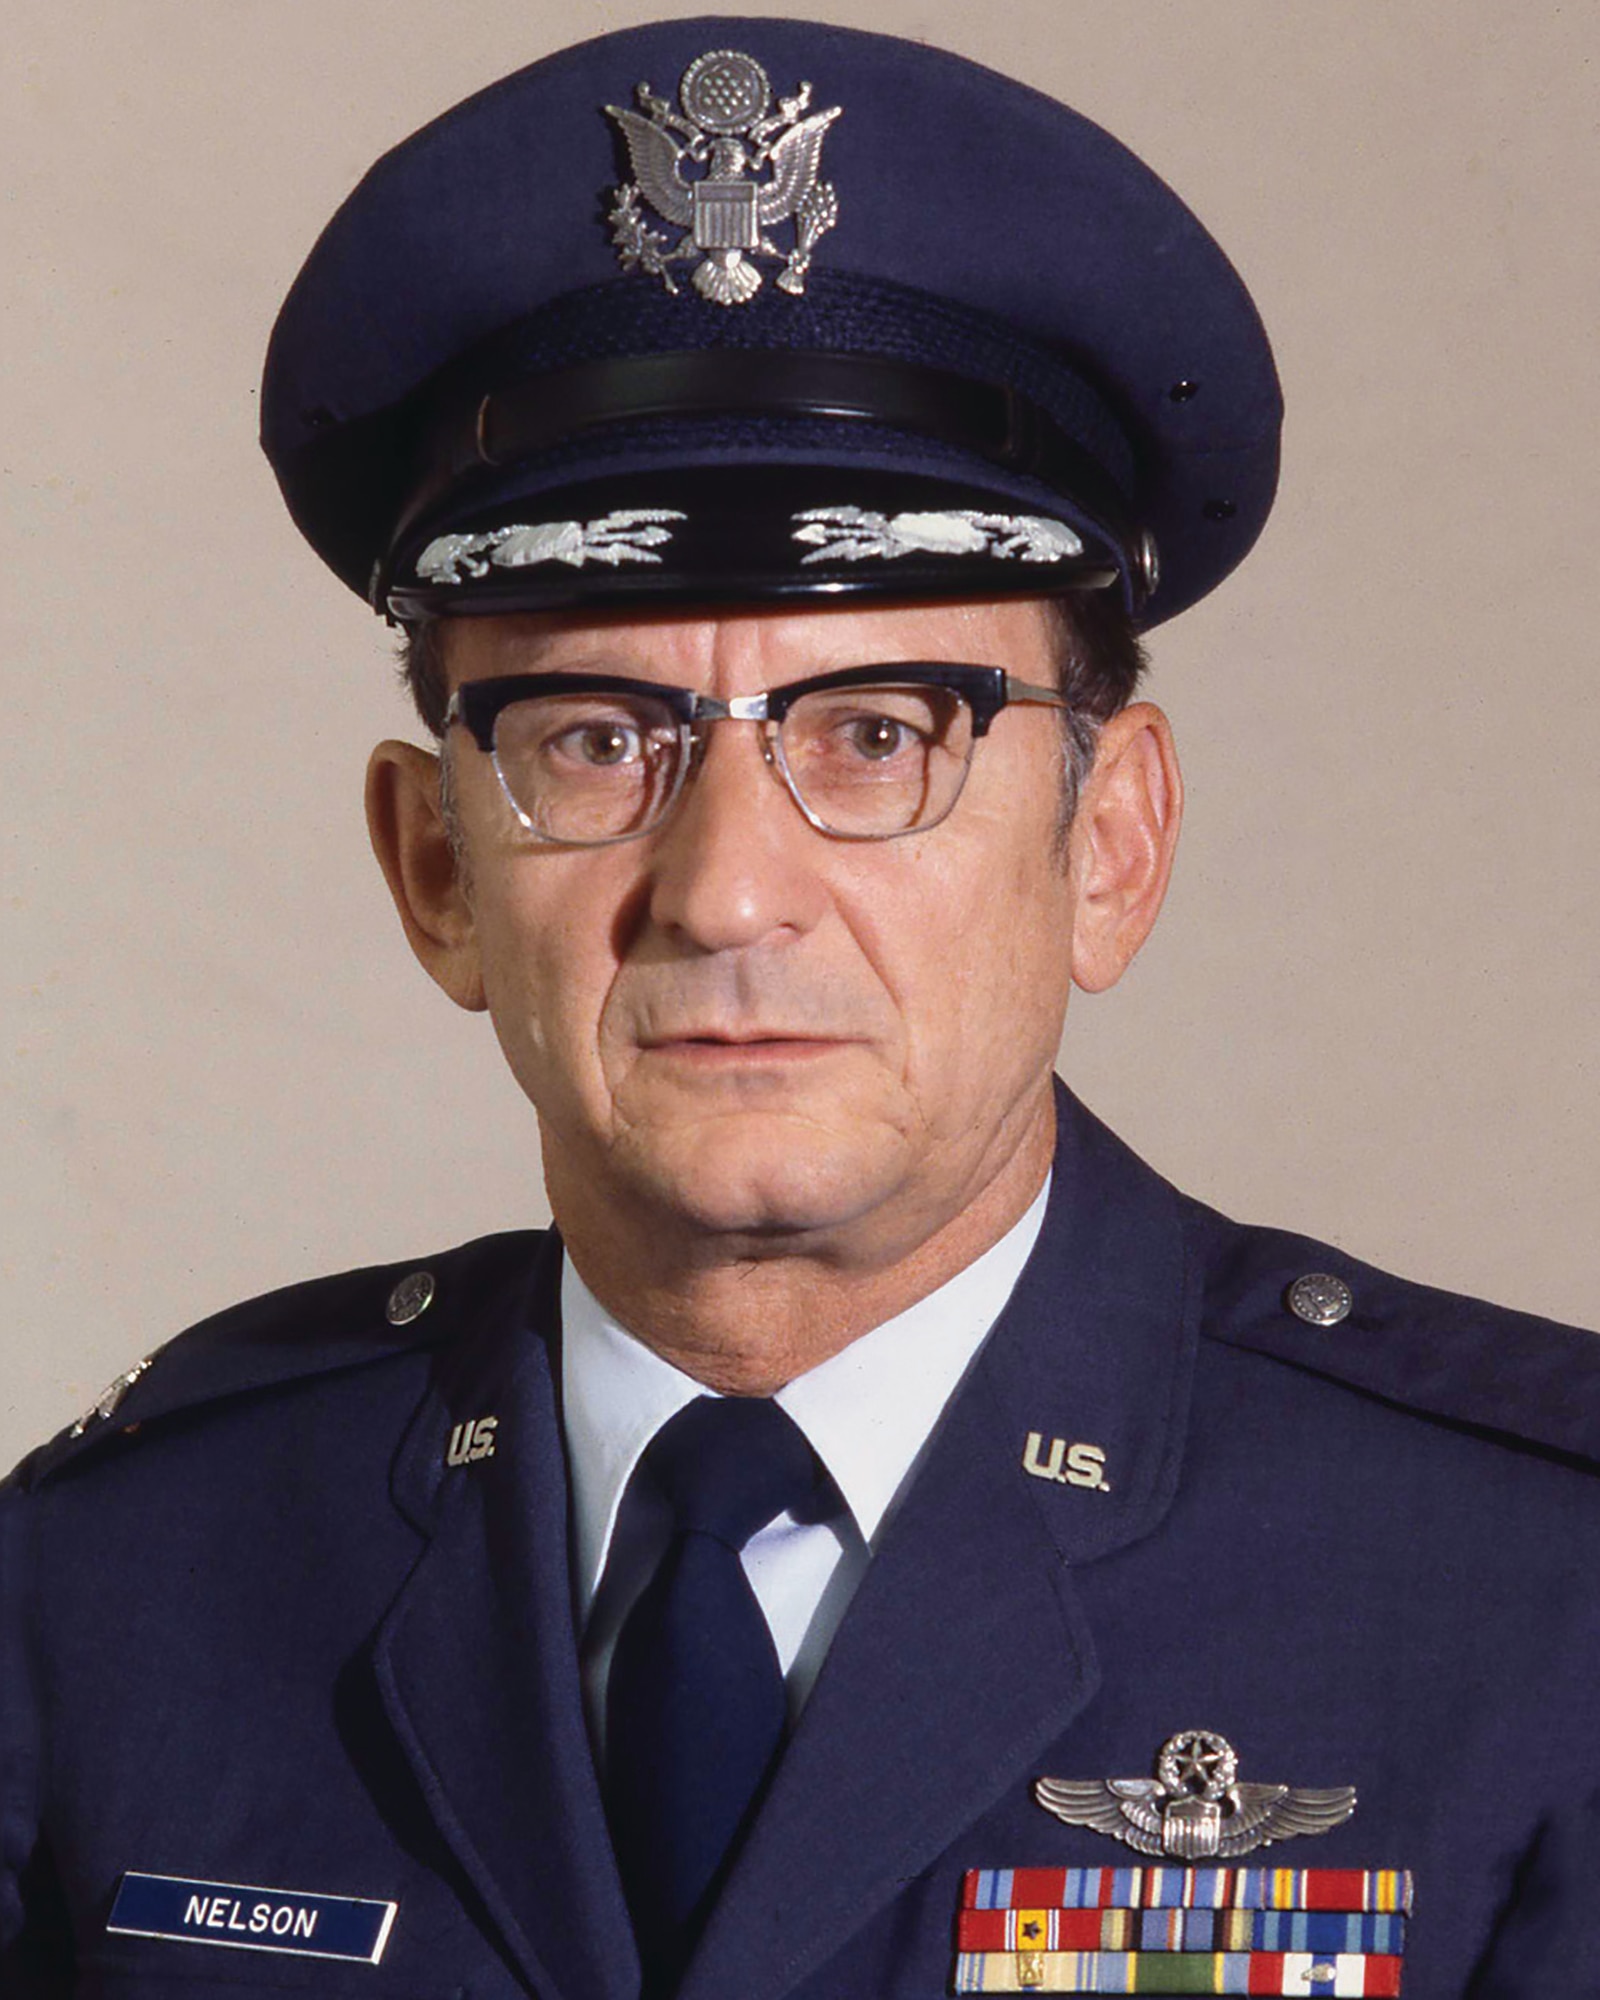 Col. Warren Nelson 185th Fighter Wing Commander, Iowa Air National (Ret.) served as Wing Commander from April 1976 to May 1980. Nelson was a member of the 185th from the unit's beginning, he was also the unit’s last World War II veteran to serve as Wing Commander before retiring in 1980. 